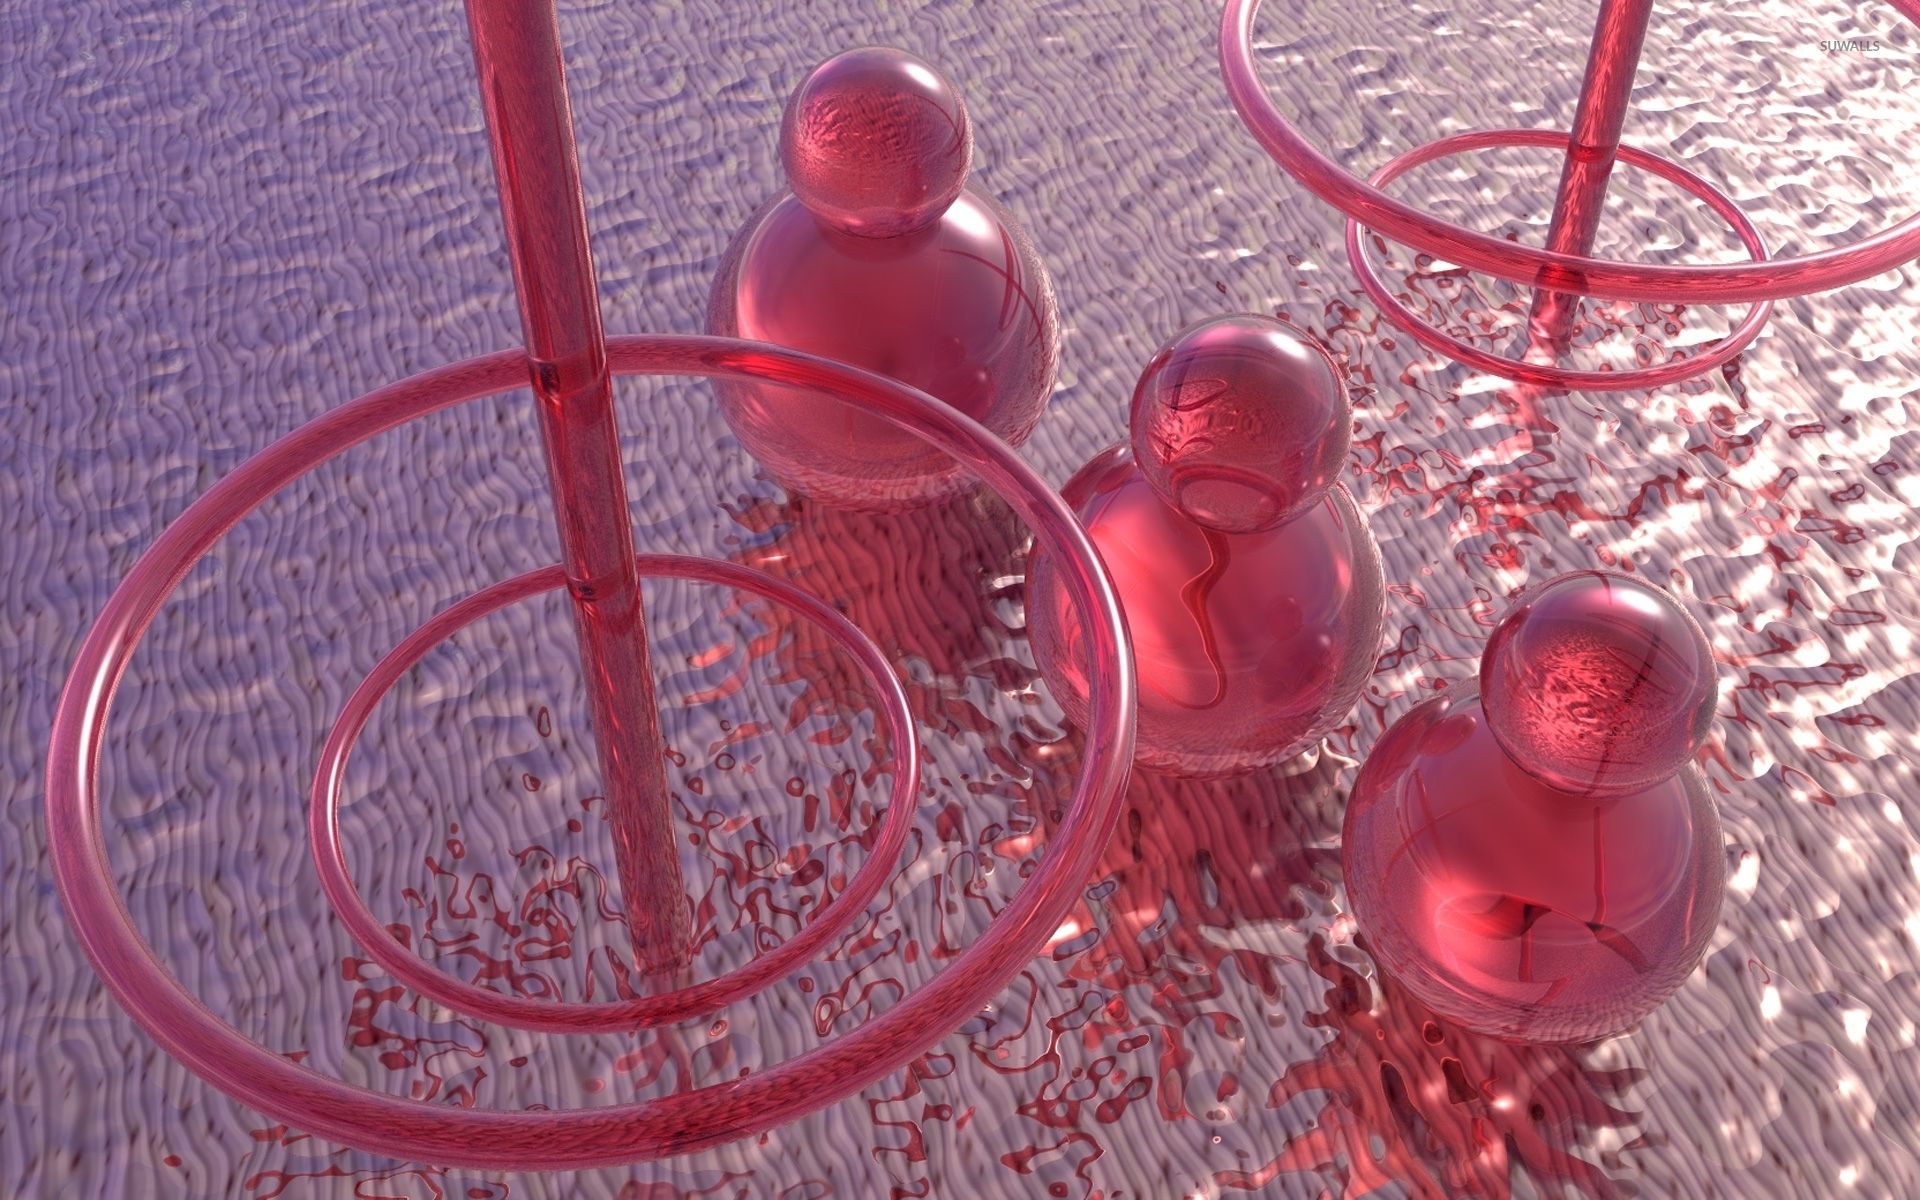 Red glass objects including circles and spheres are scattered on a metallic surface. - Chemistry